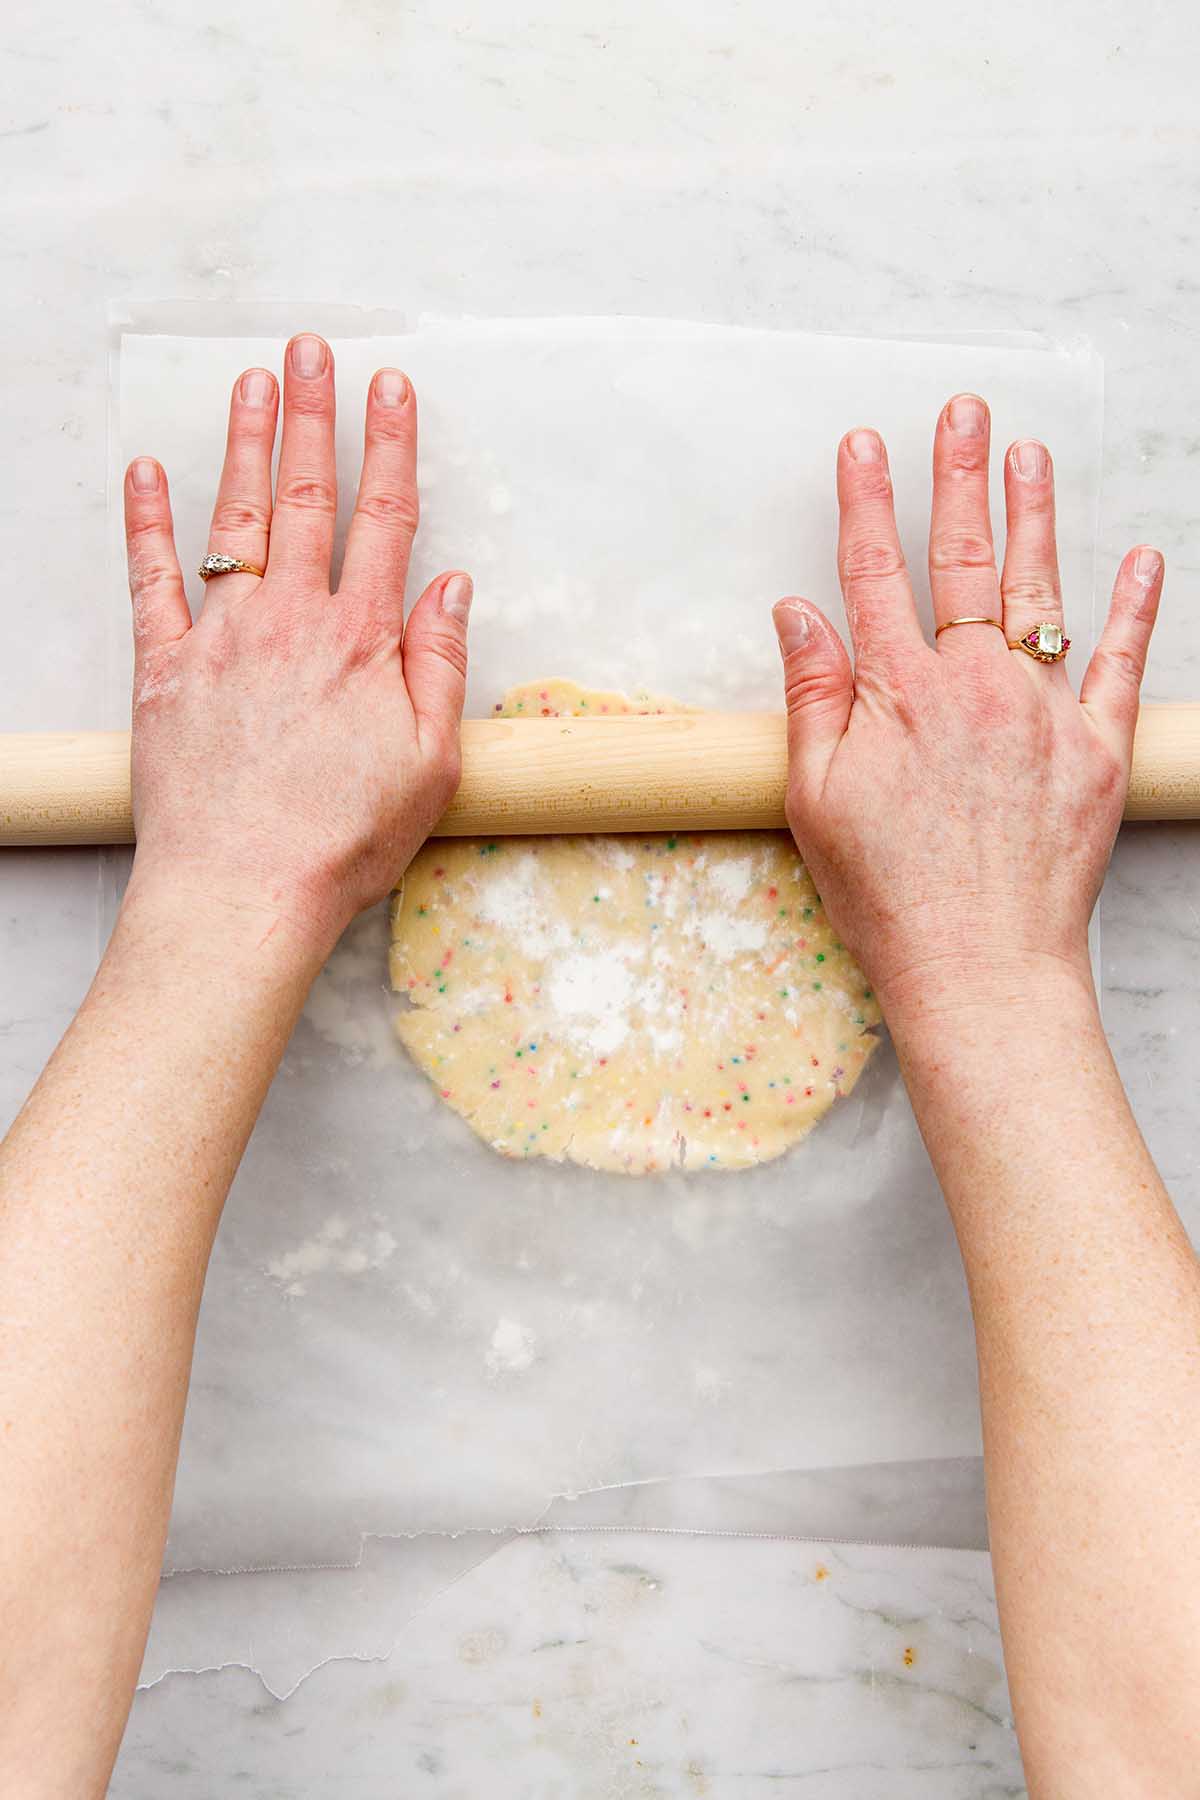 Hands using a wooden rolling pin to roll cookie dough between two sheets of lightly floured wax paper.